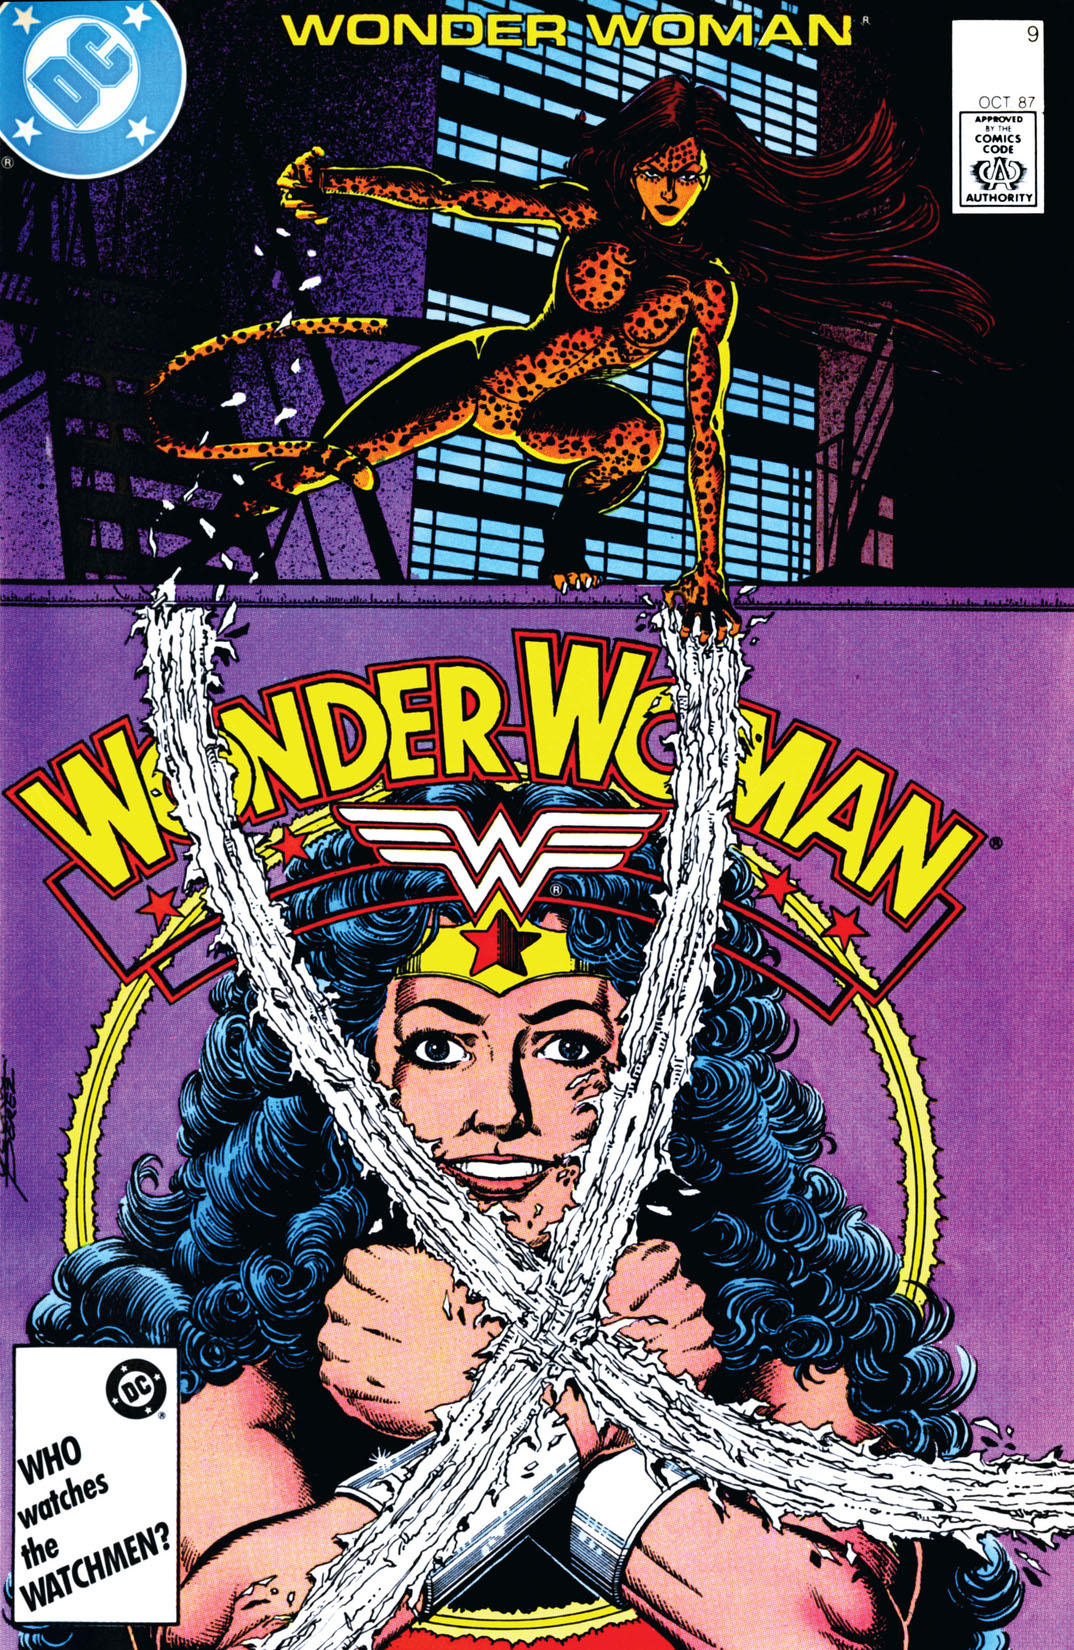 Wonder Woman (1986-2006) #9 preview images